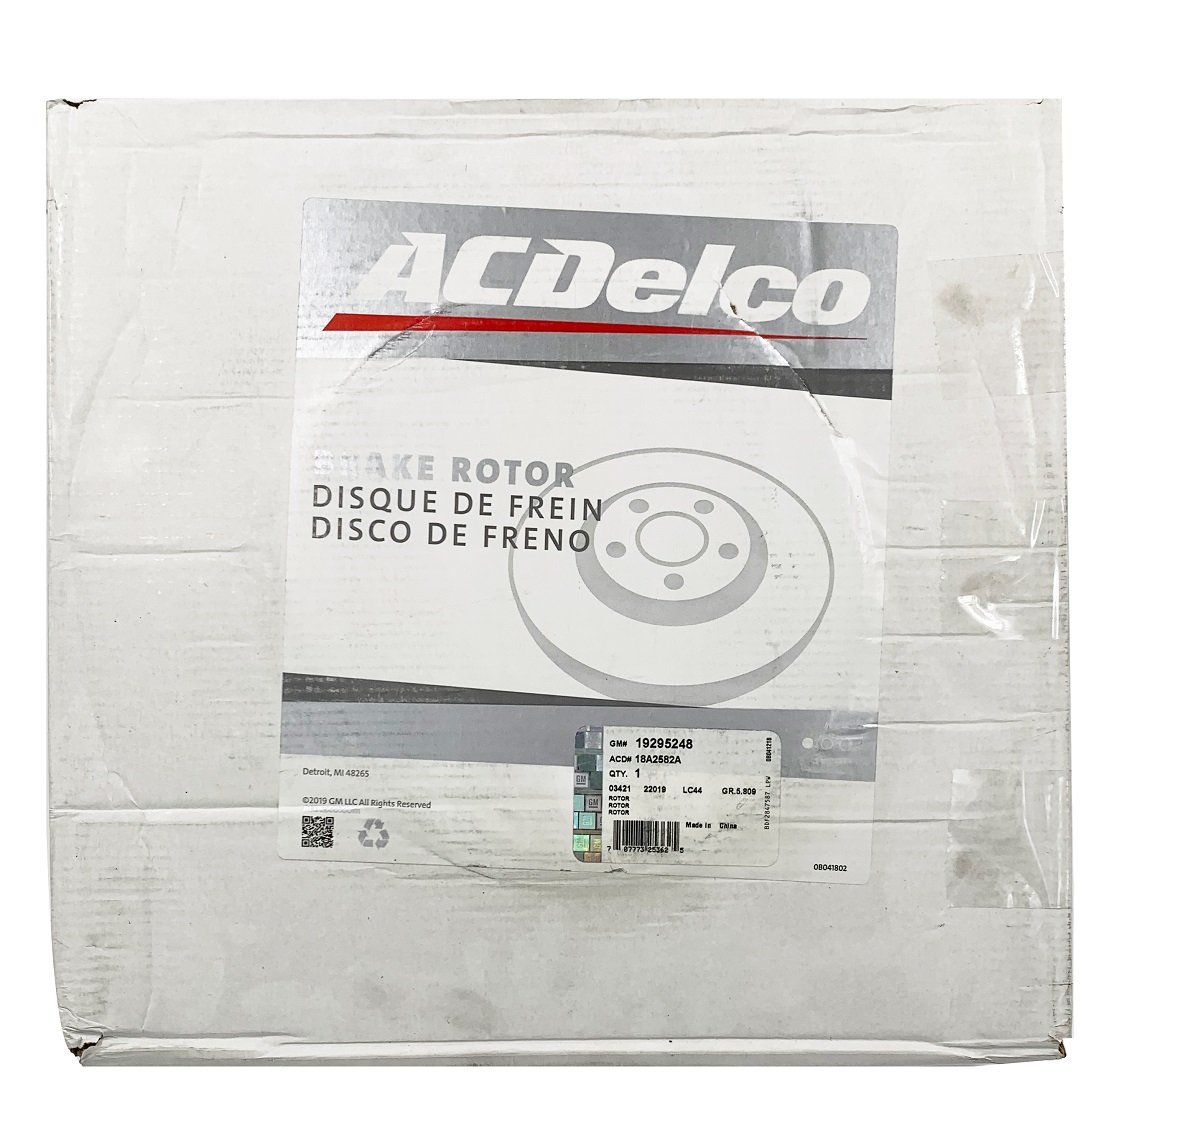 AC Delco (ACDelco) disk brake rotor rear (1 sheets ) 18A2582A FORD( Ford )E-150/E-250 for 